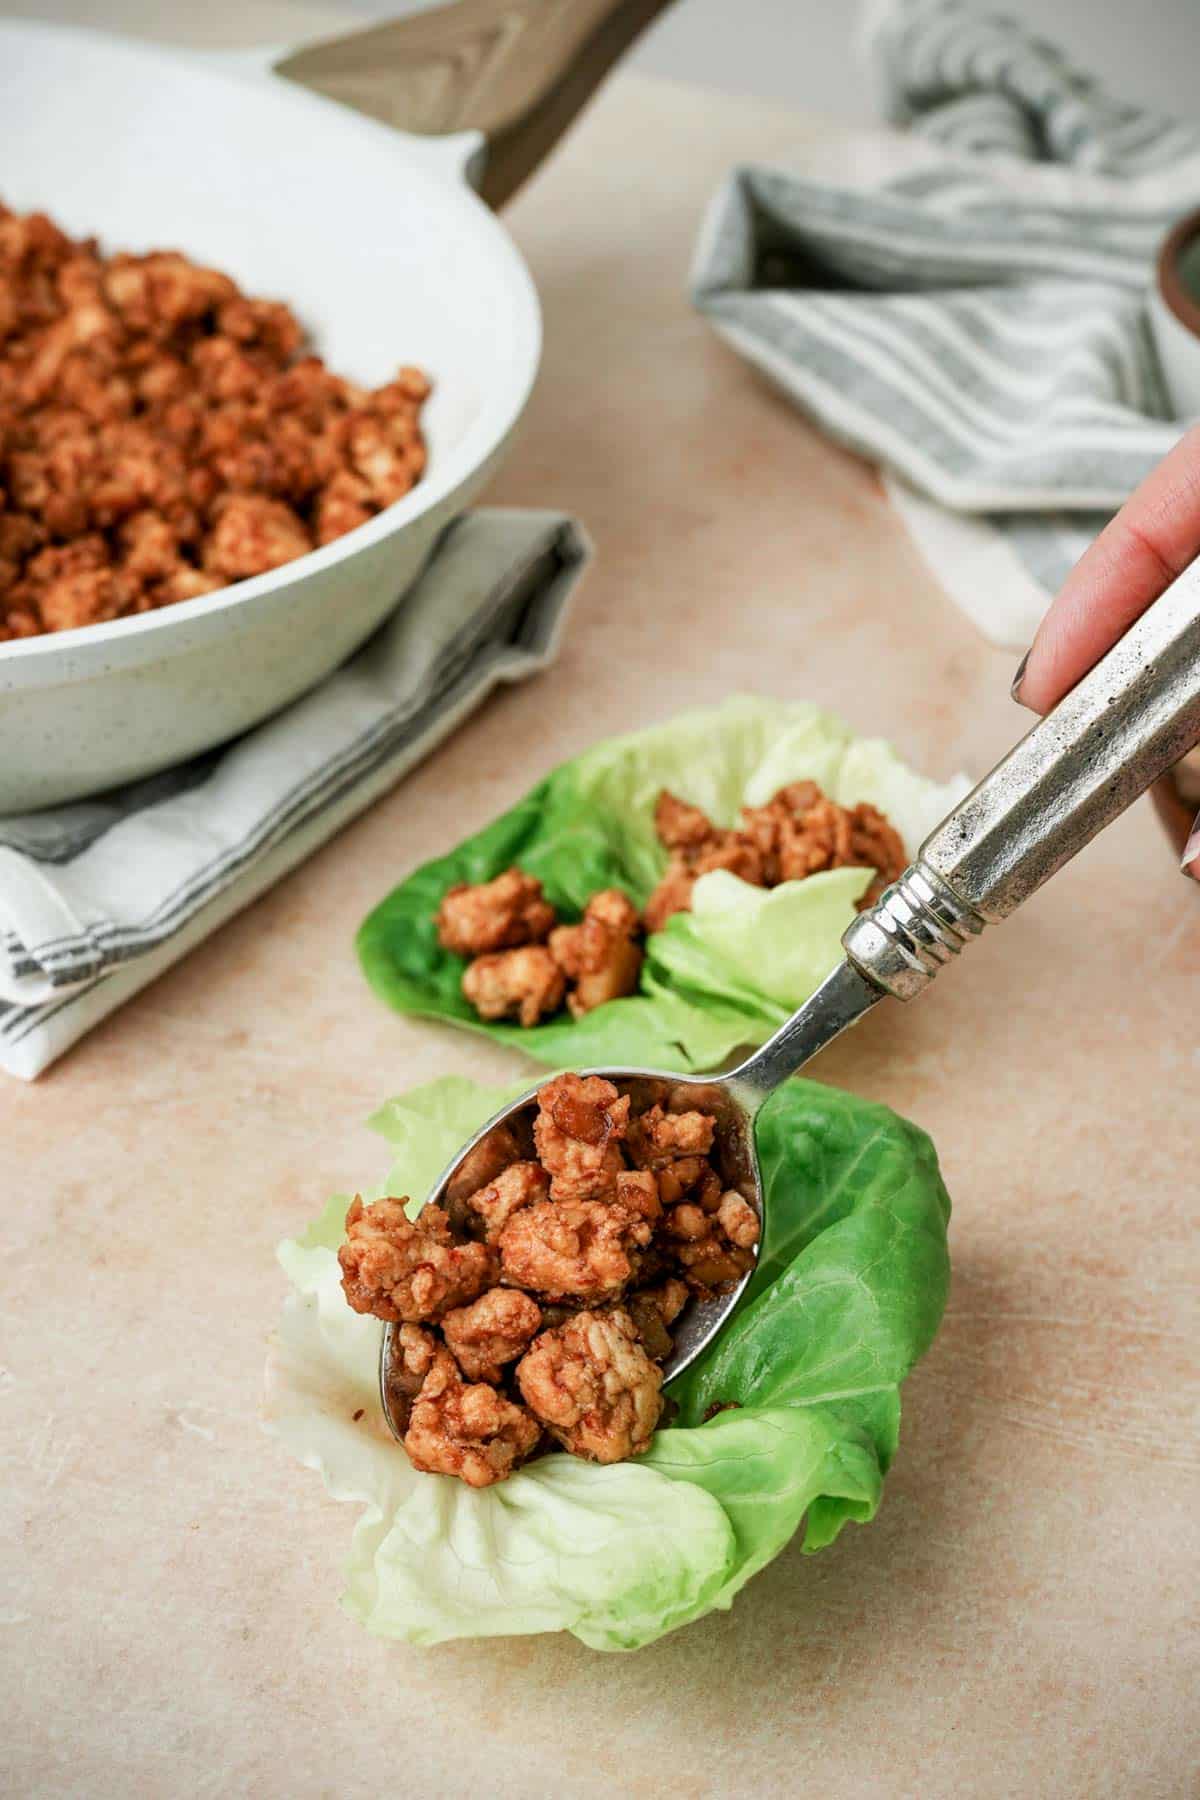 spooning red ground chicken mixture into a lettuce cup